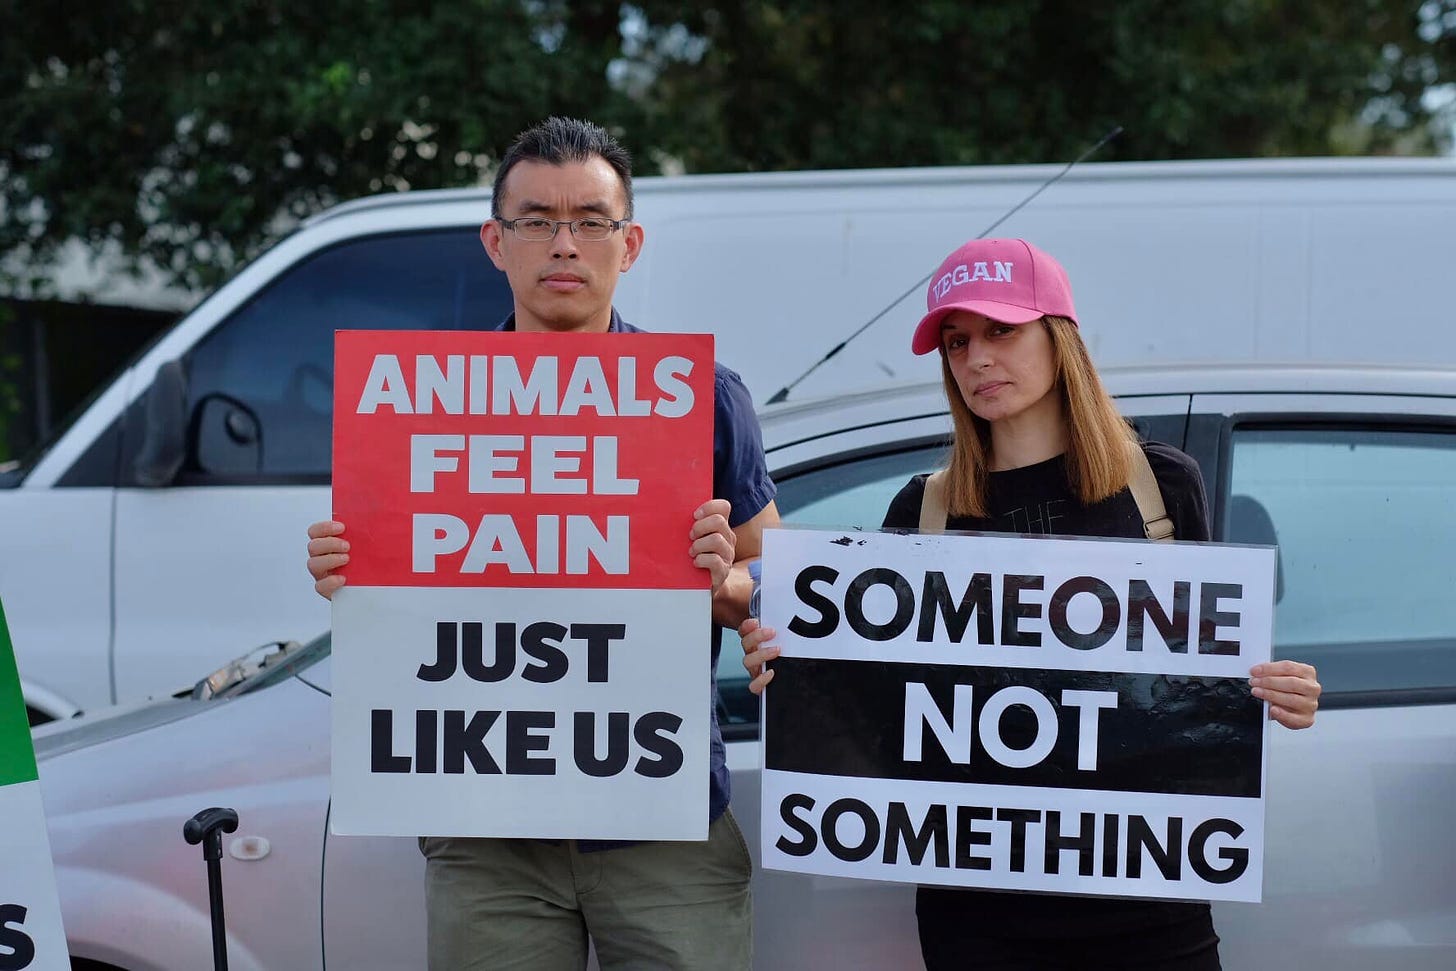 May be an image of 2 people, people standing, outdoors and text that says 'EGAN ANIMALS FEEL PAIN JUST LIKEUS SOMEONE NOT SOMETHING'